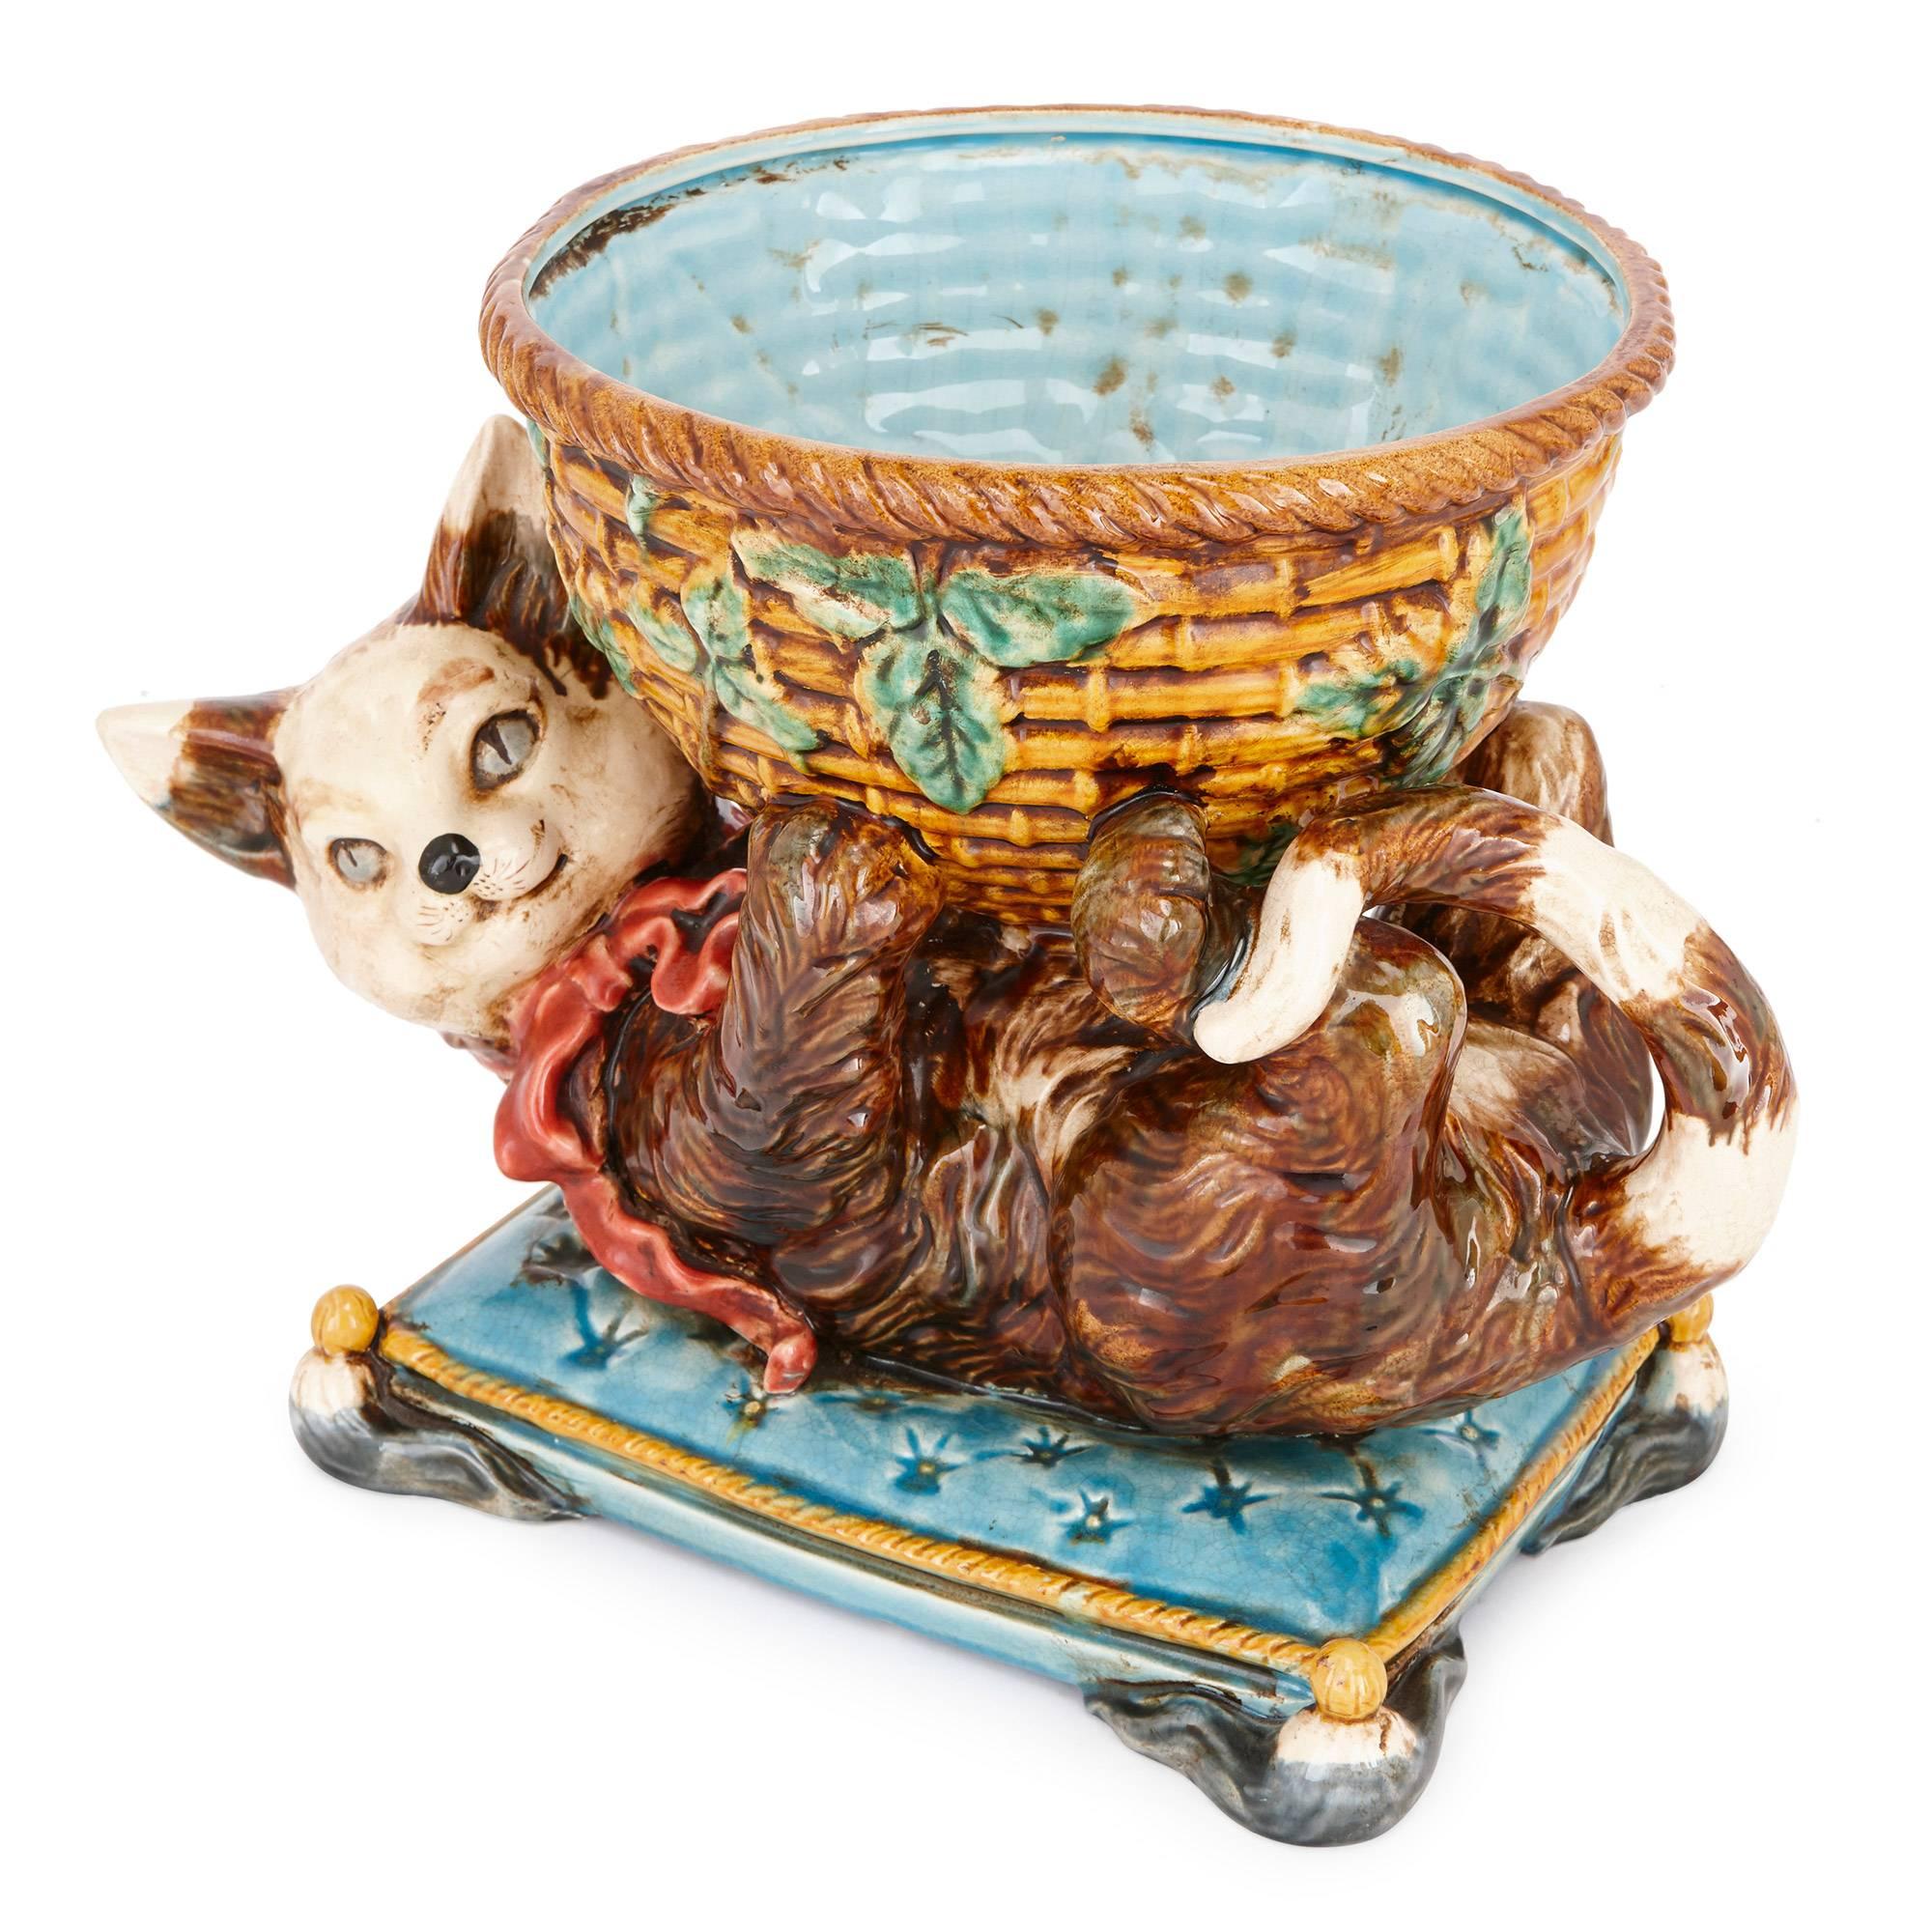 This charming and playful model is crafted in Majolica by Jerome Massier, who, together with his cousins, revived the production of Majolica-ware in the French town Vallauris in the late 19th century. The Massiers became known for their playful